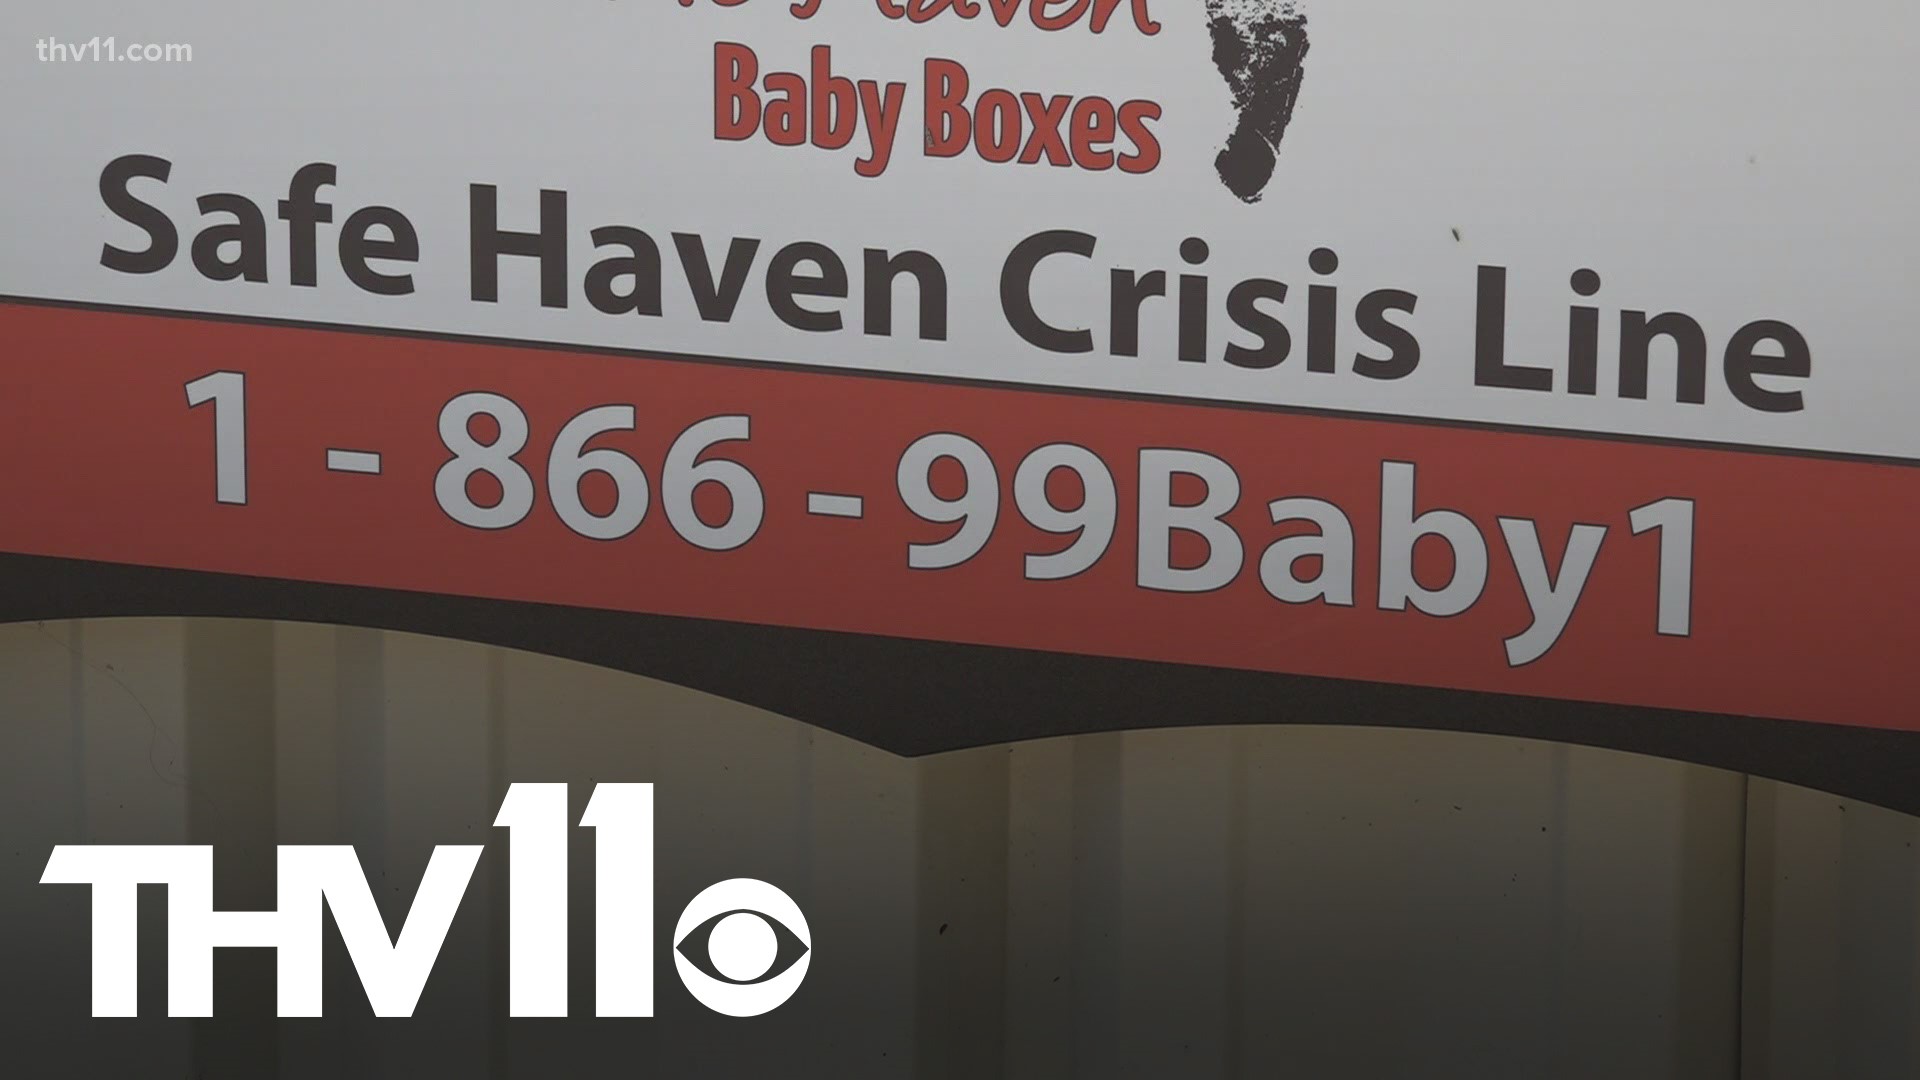 If the project goes through, this would make for the second baby box in Central Arkansas, with the first safe haven being located in Benton.